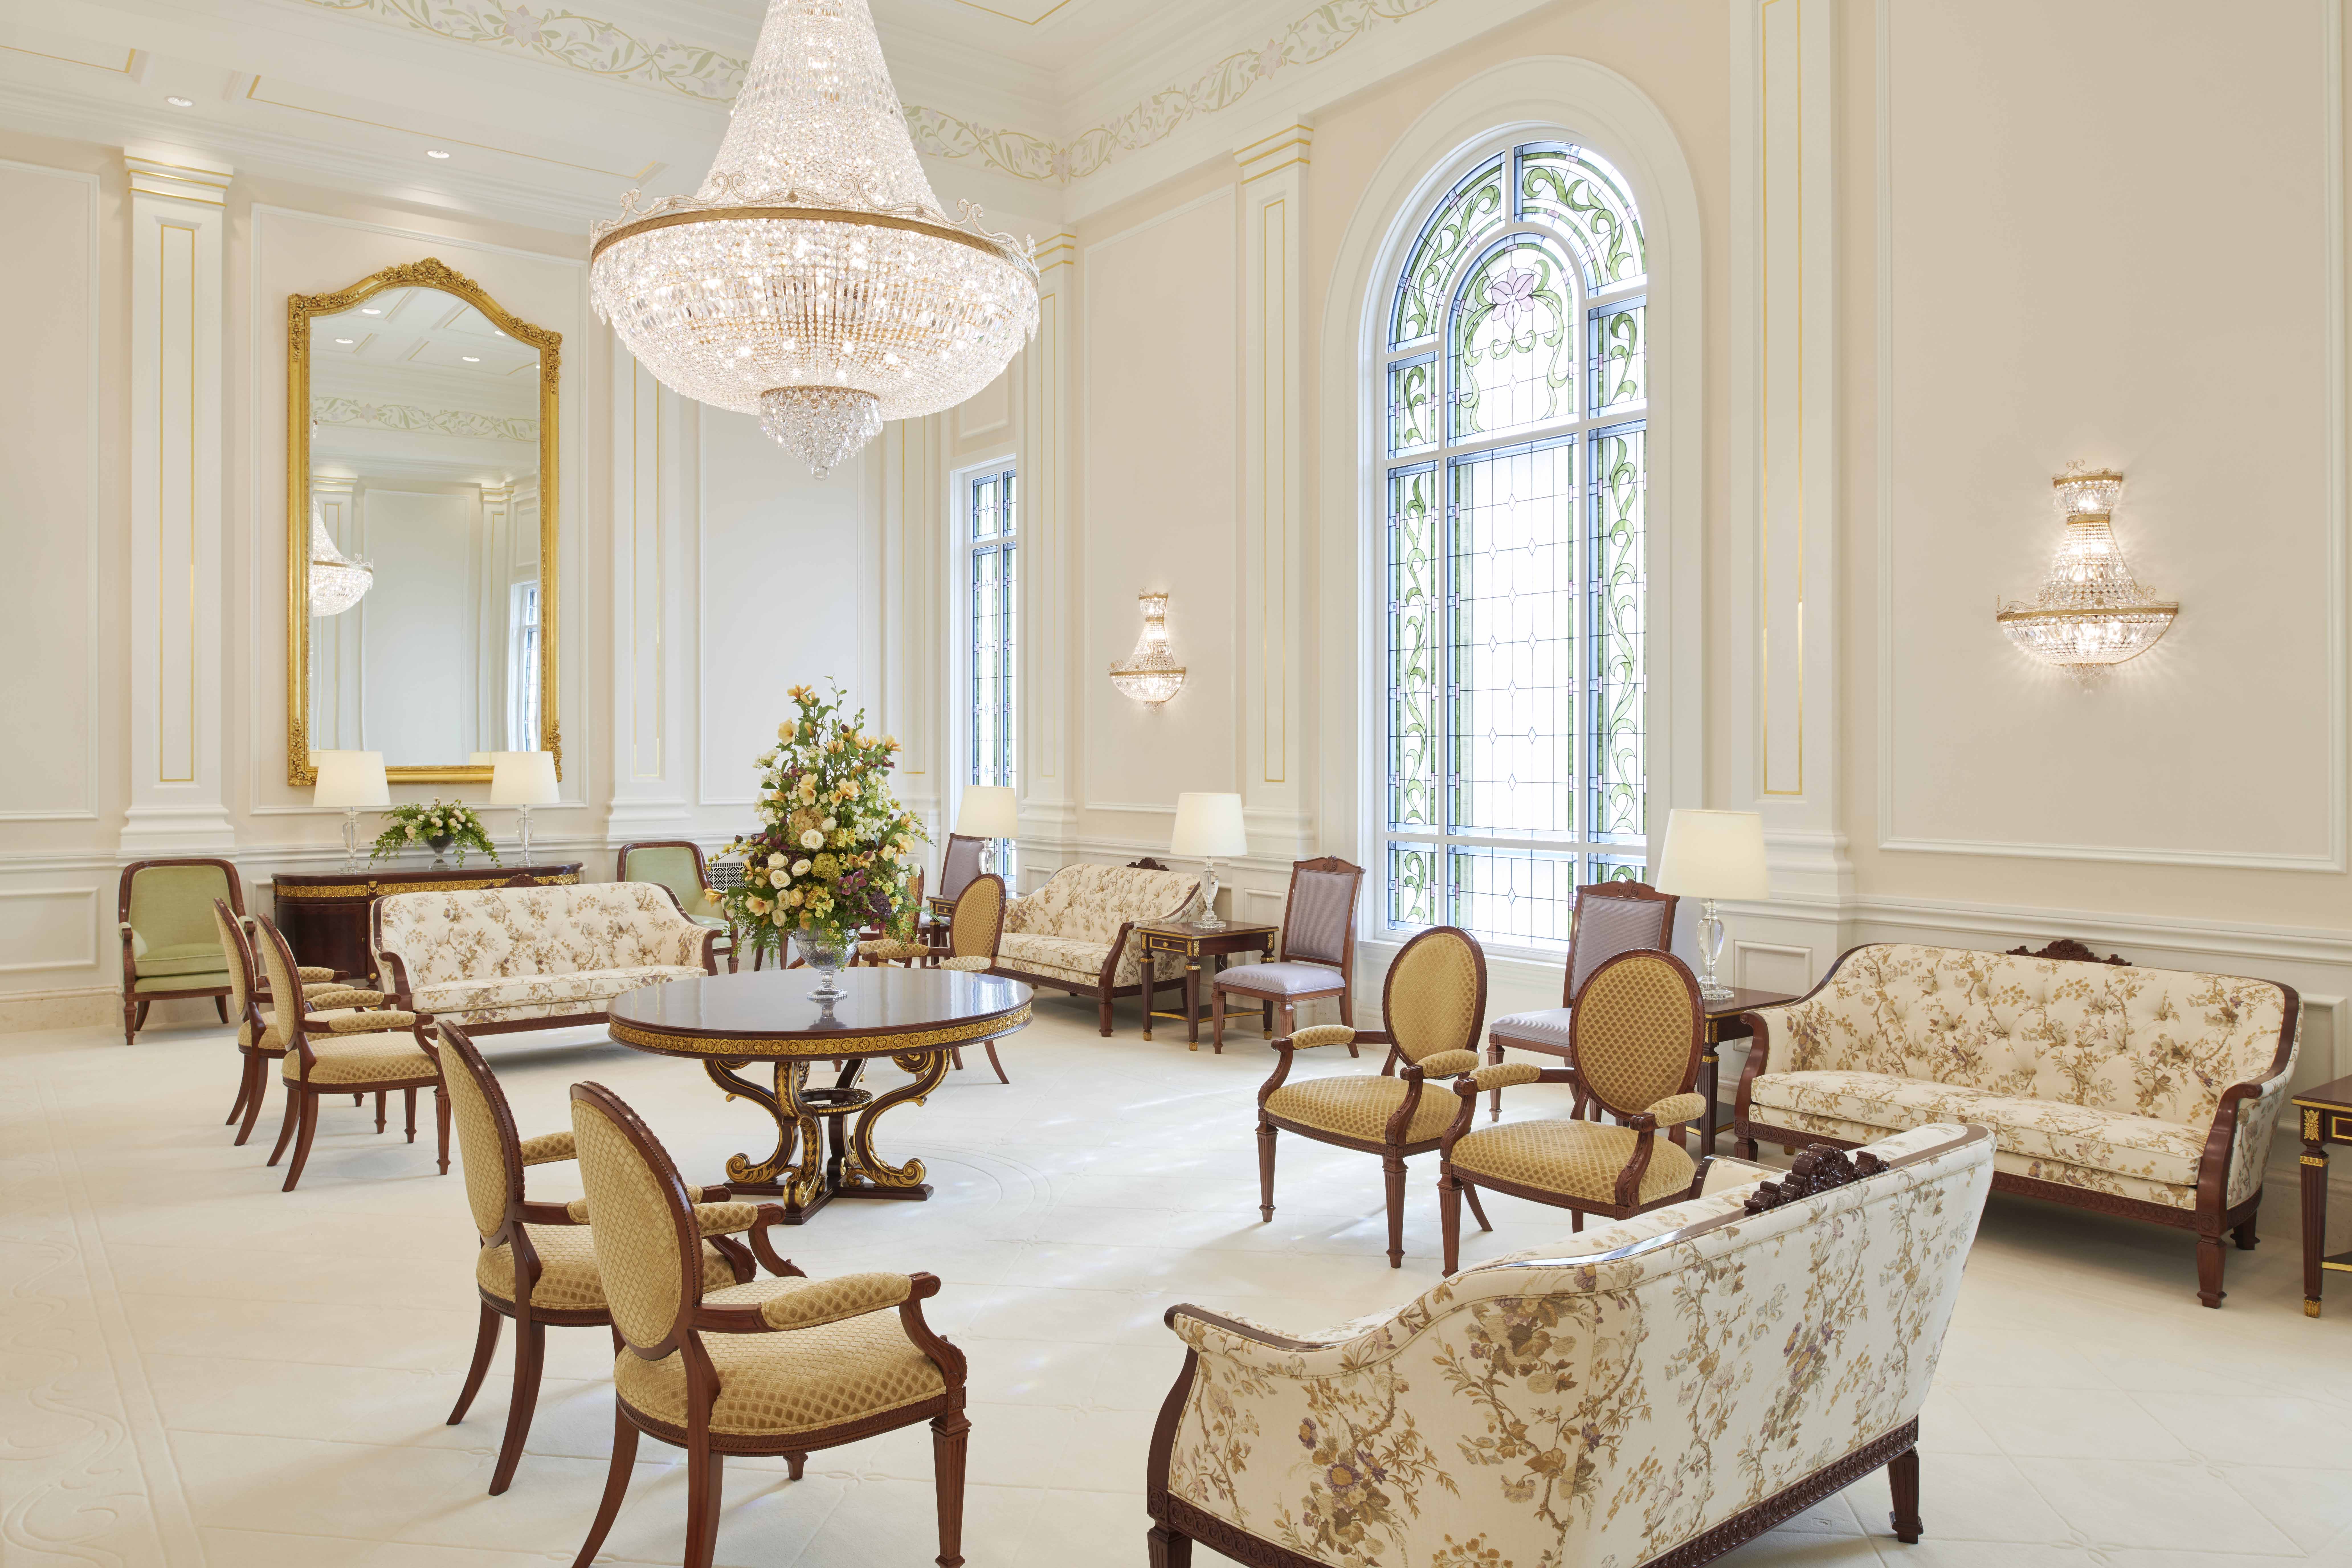 A white room contains a large chandelier and several couches and chairs.